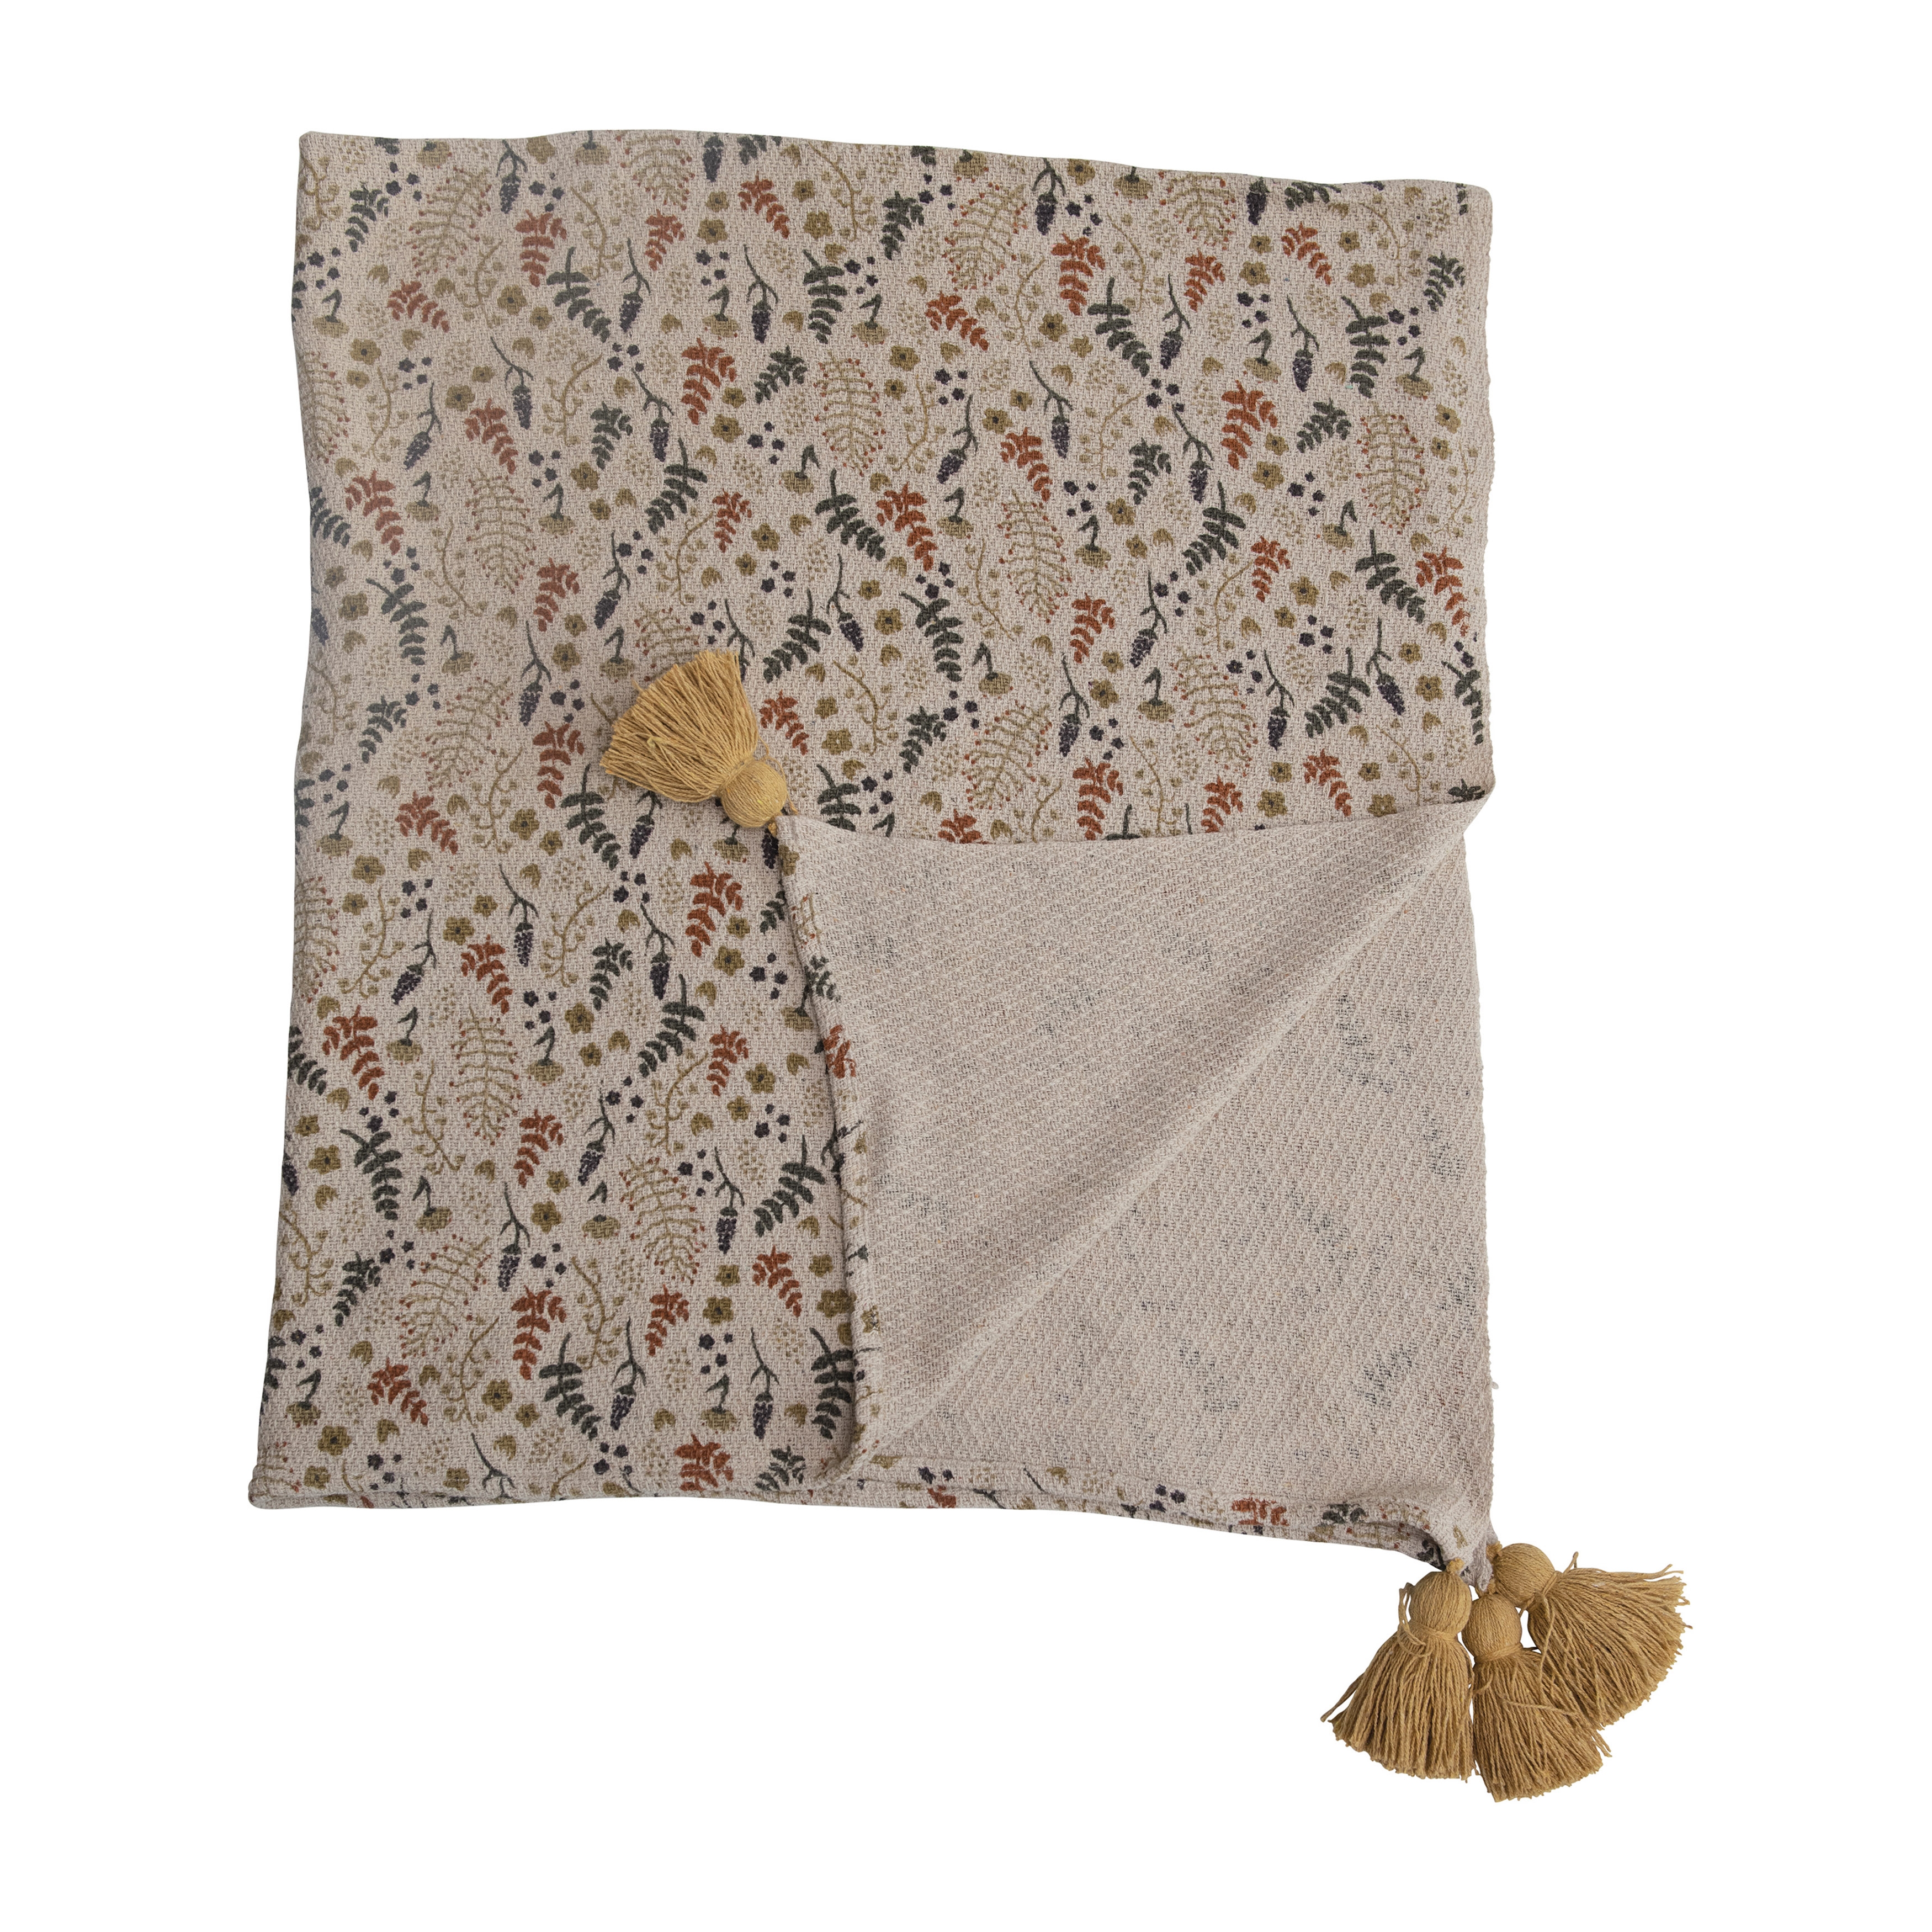 Woven Recycled Cotton Blend Printed Throw Blanket with Neutral Floral Pattern and Tassels - Image 0